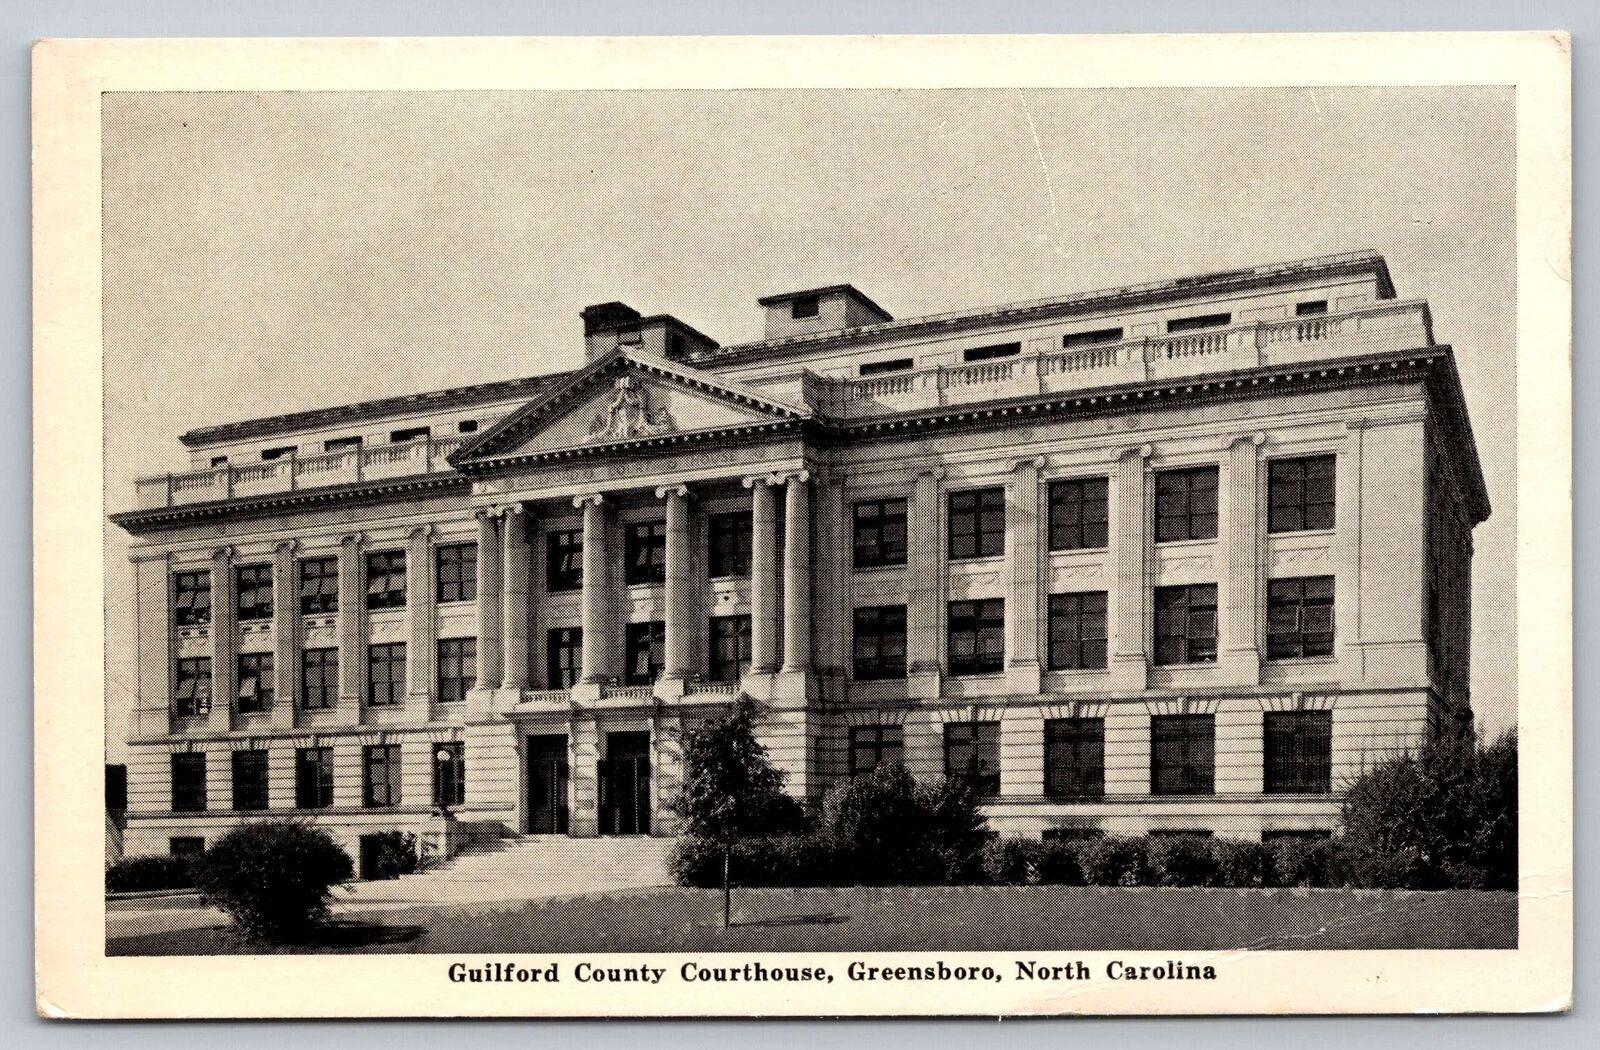 Greensboro NC - Guilford County Courthouse - 1943